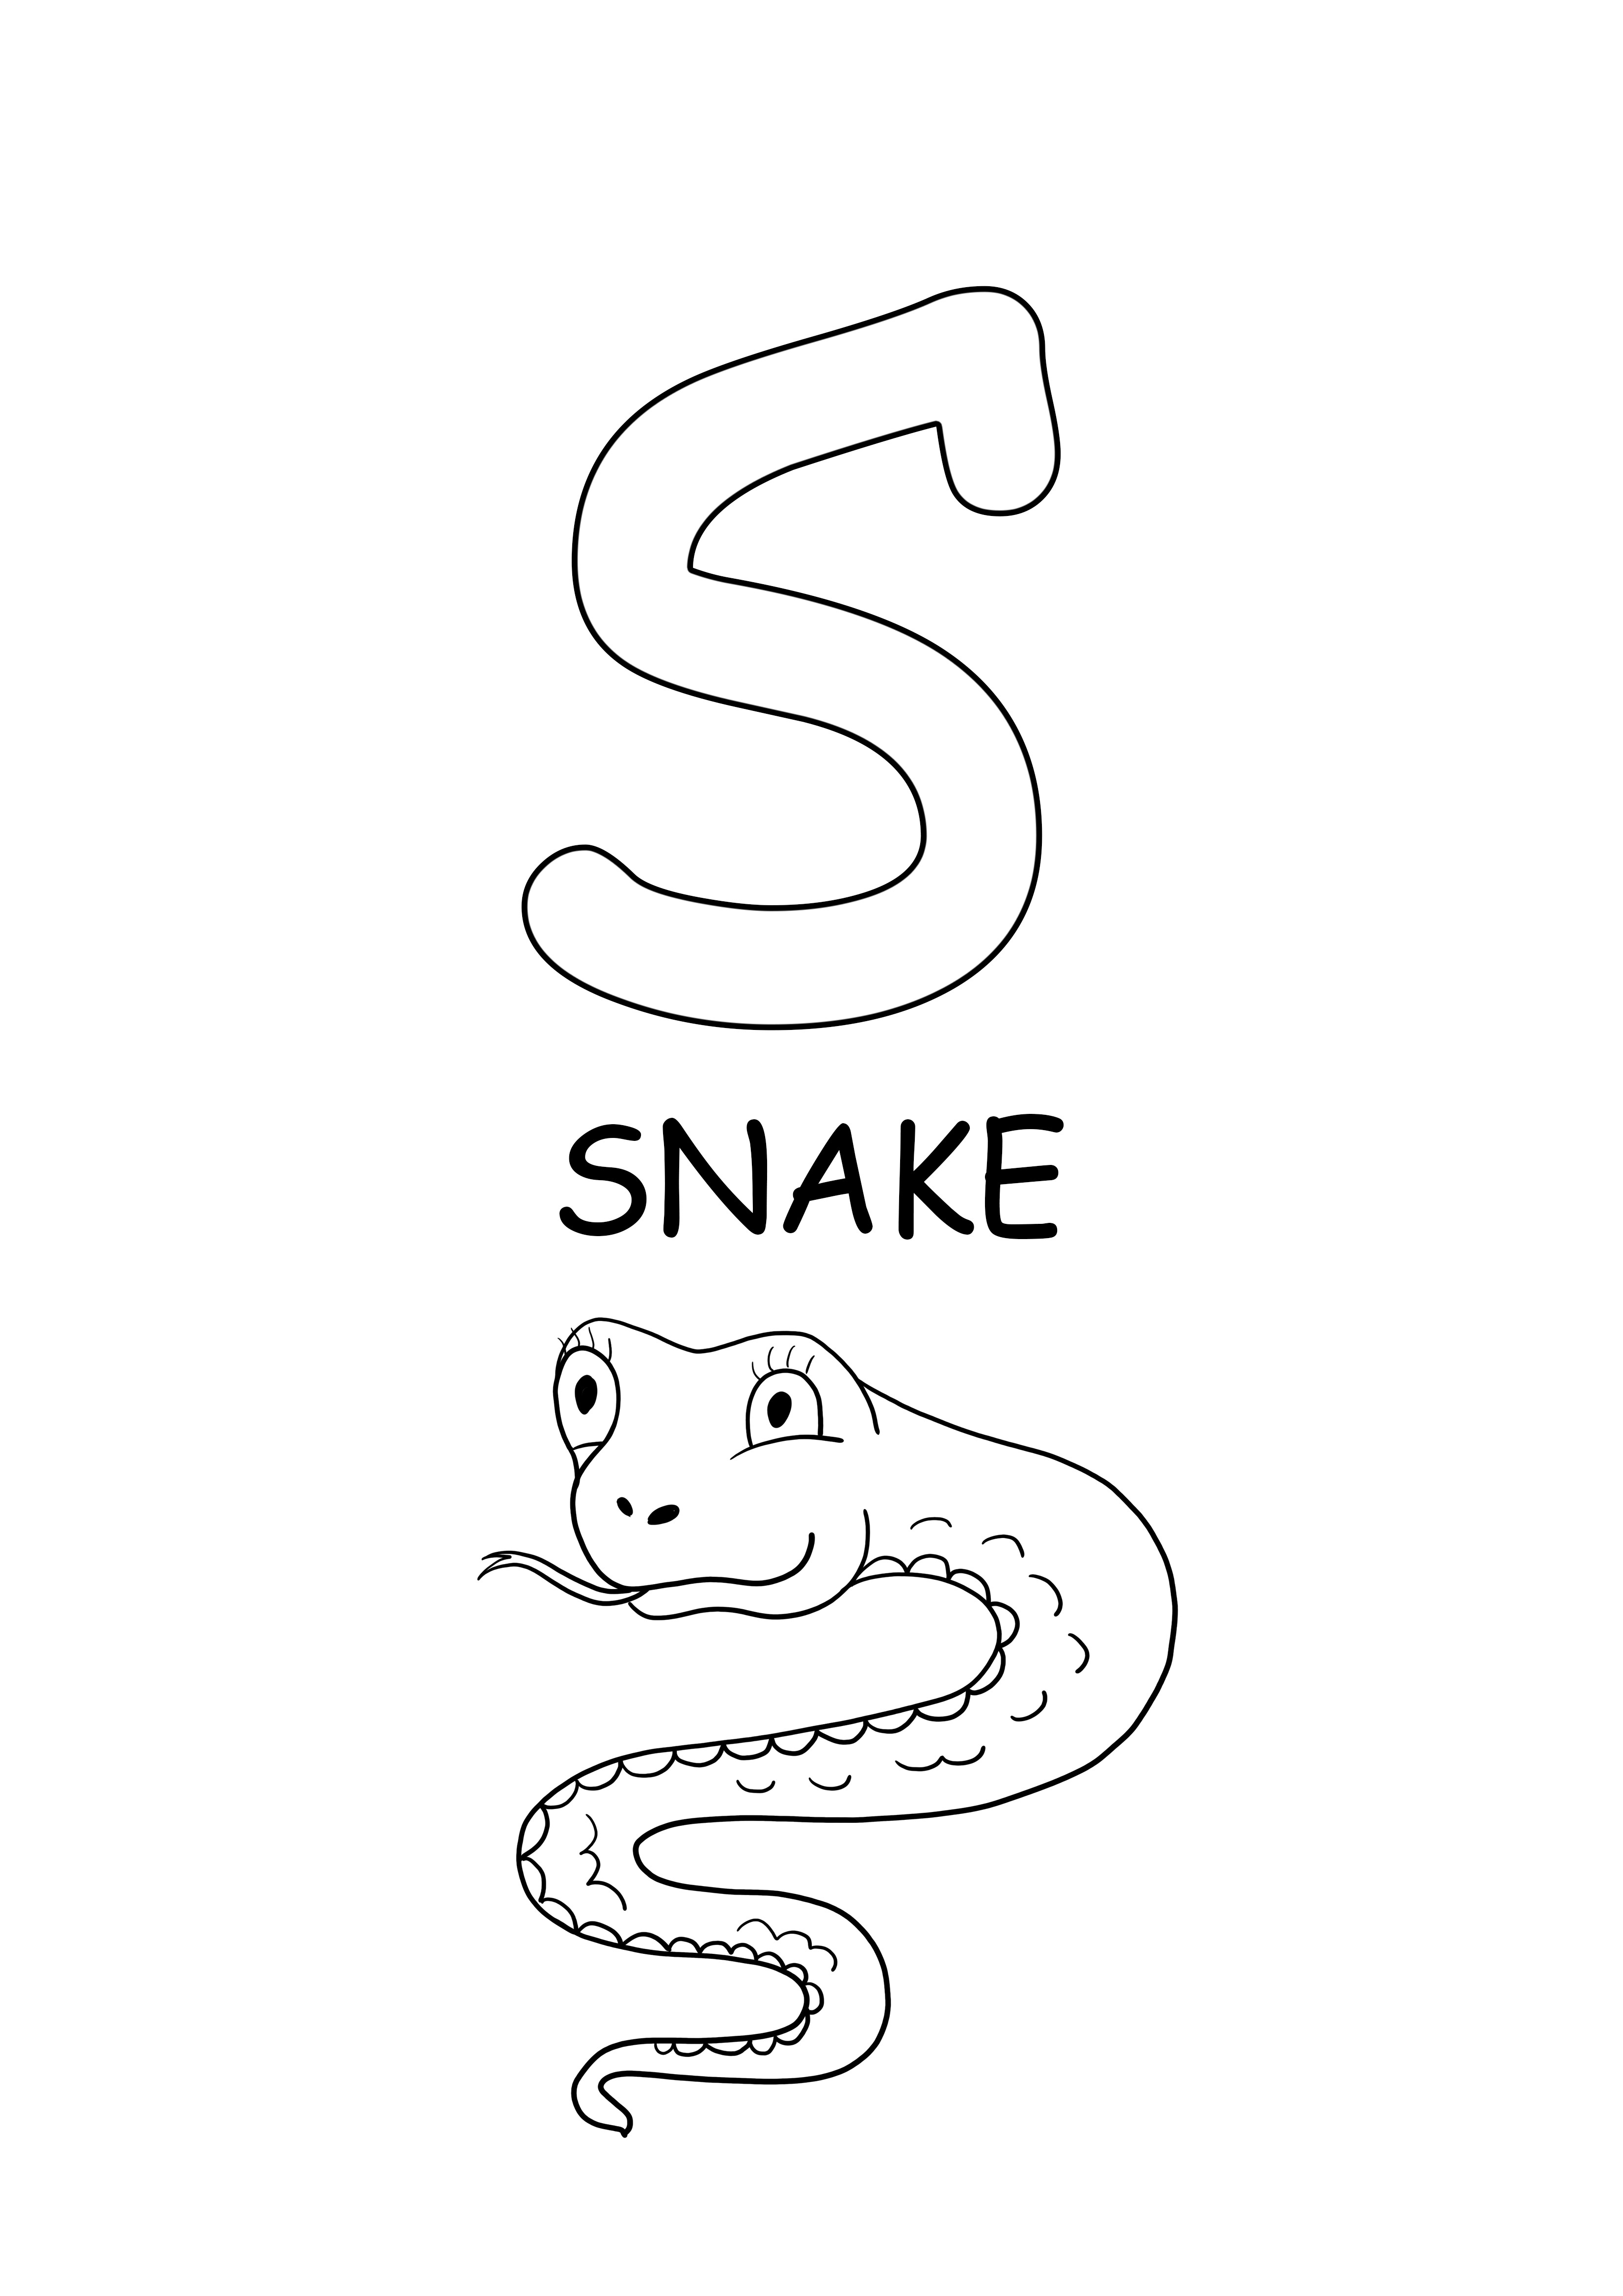 upper case word-snake free printing and coloring